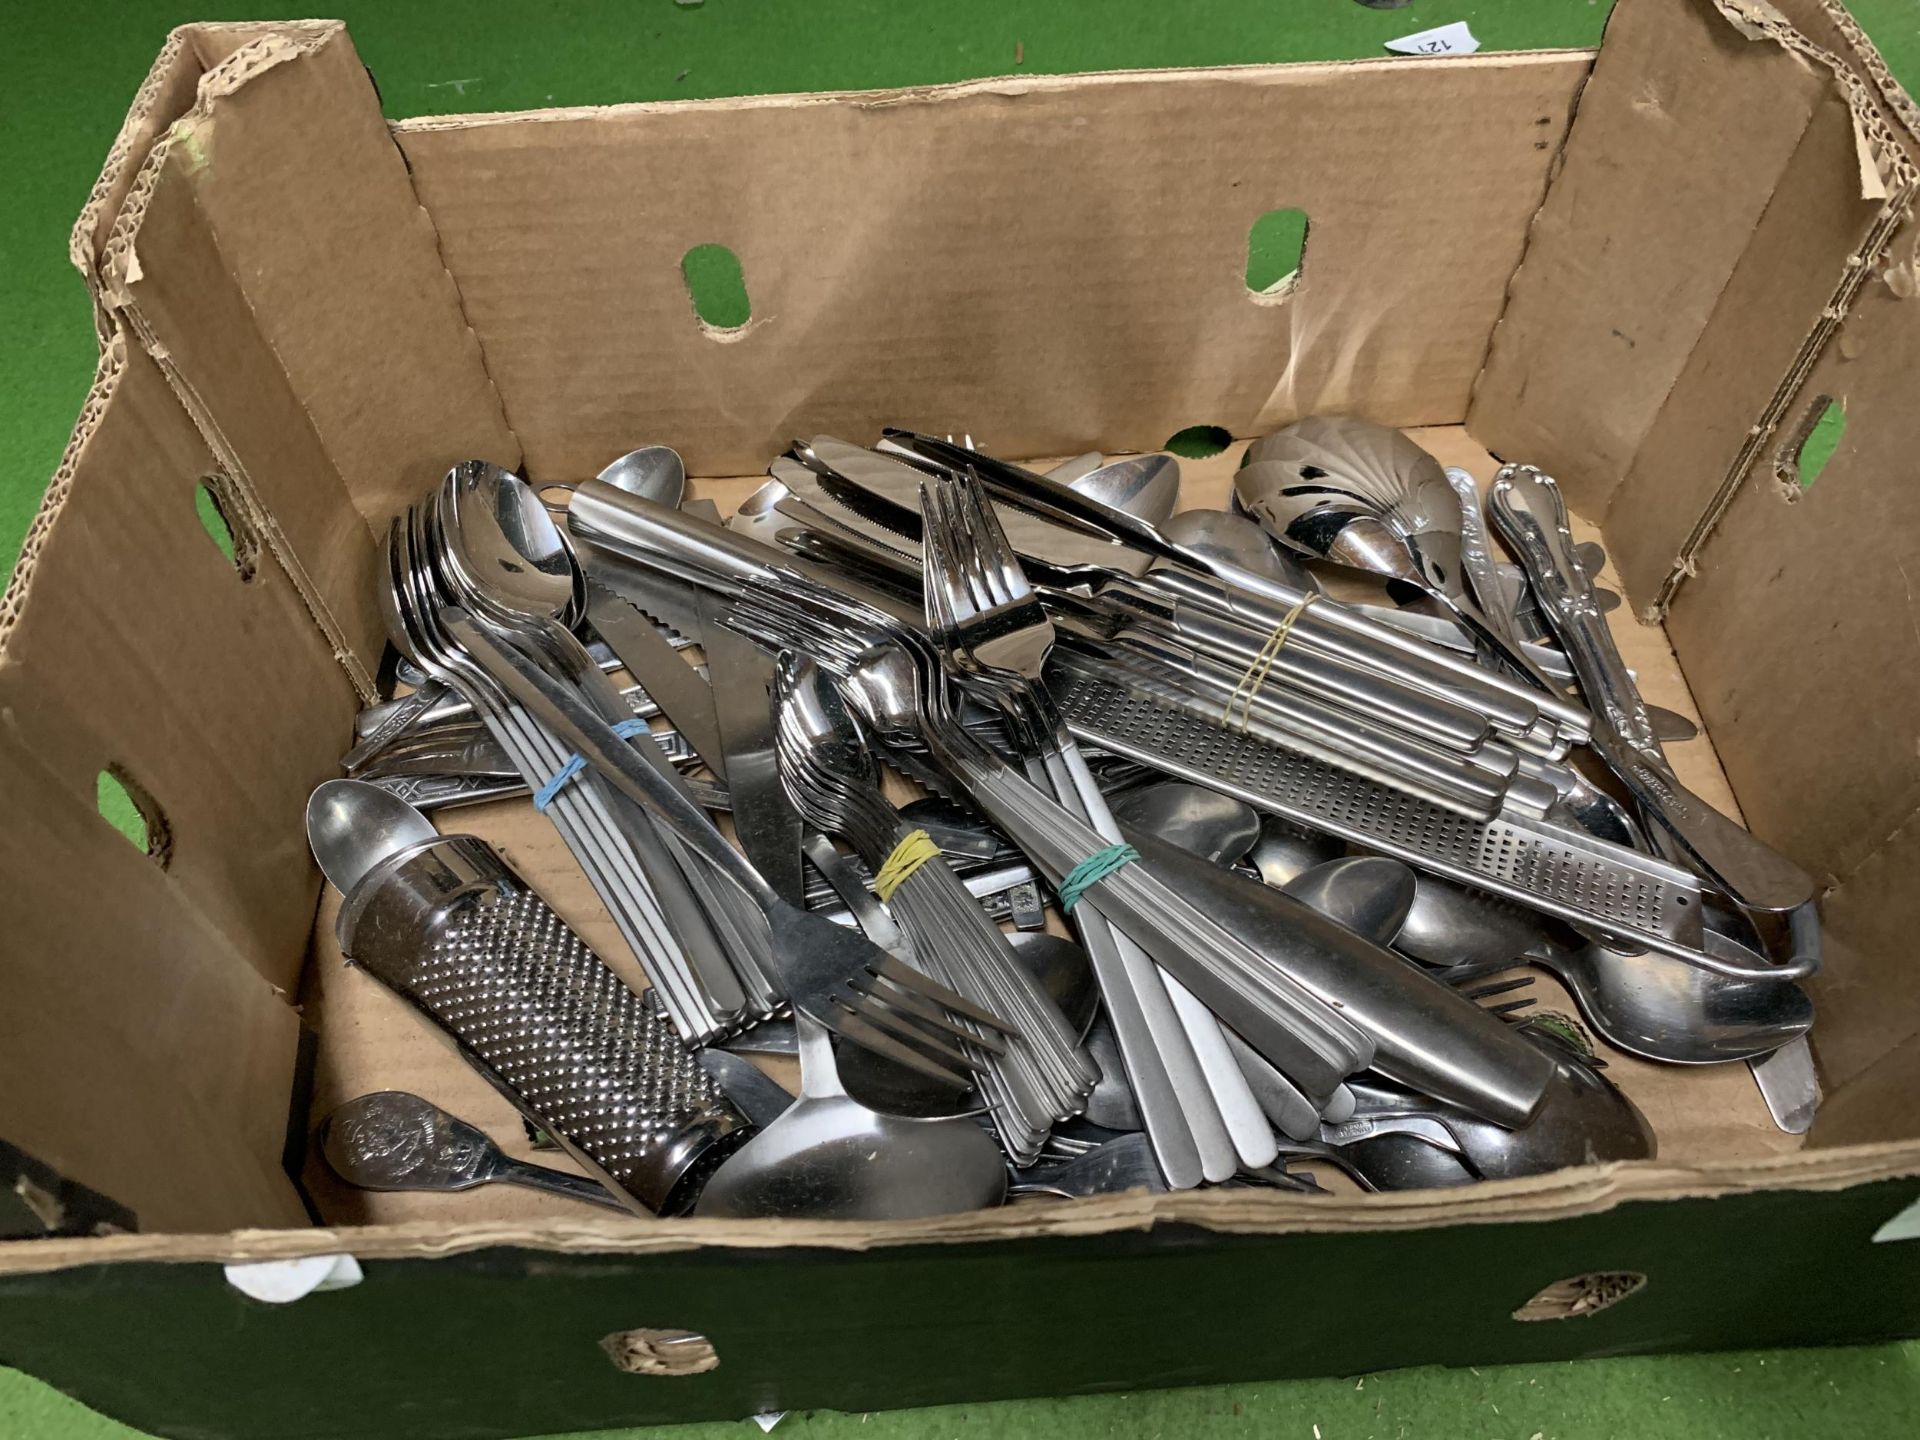 A LARGE QUANTITY OF STAINLESS STEEL CUTLERY